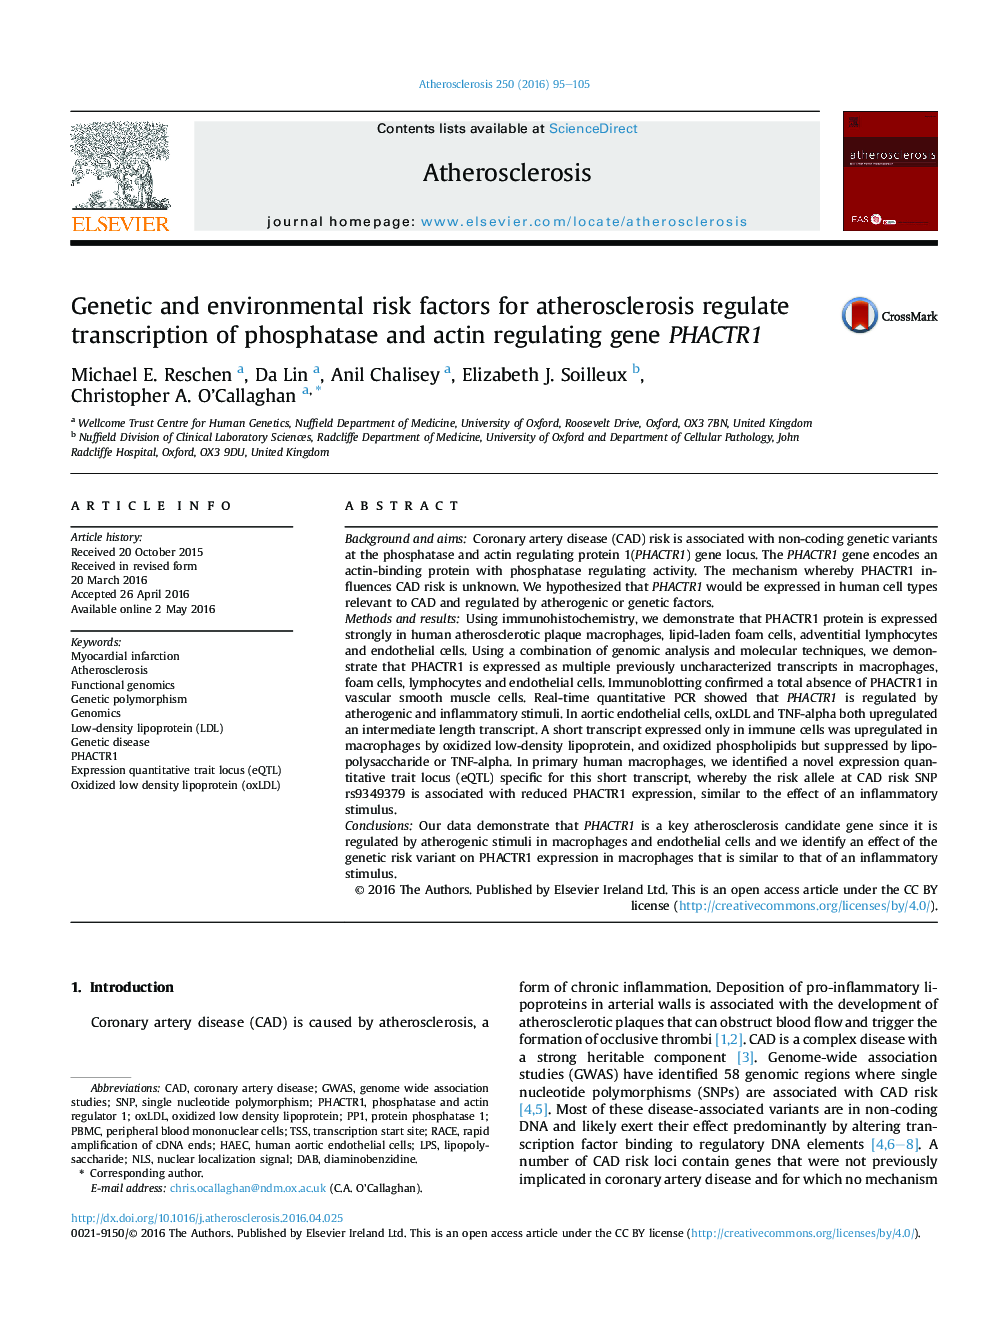 Genetic and environmental risk factors for atherosclerosis regulate transcription of phosphatase and actin regulating gene PHACTR1